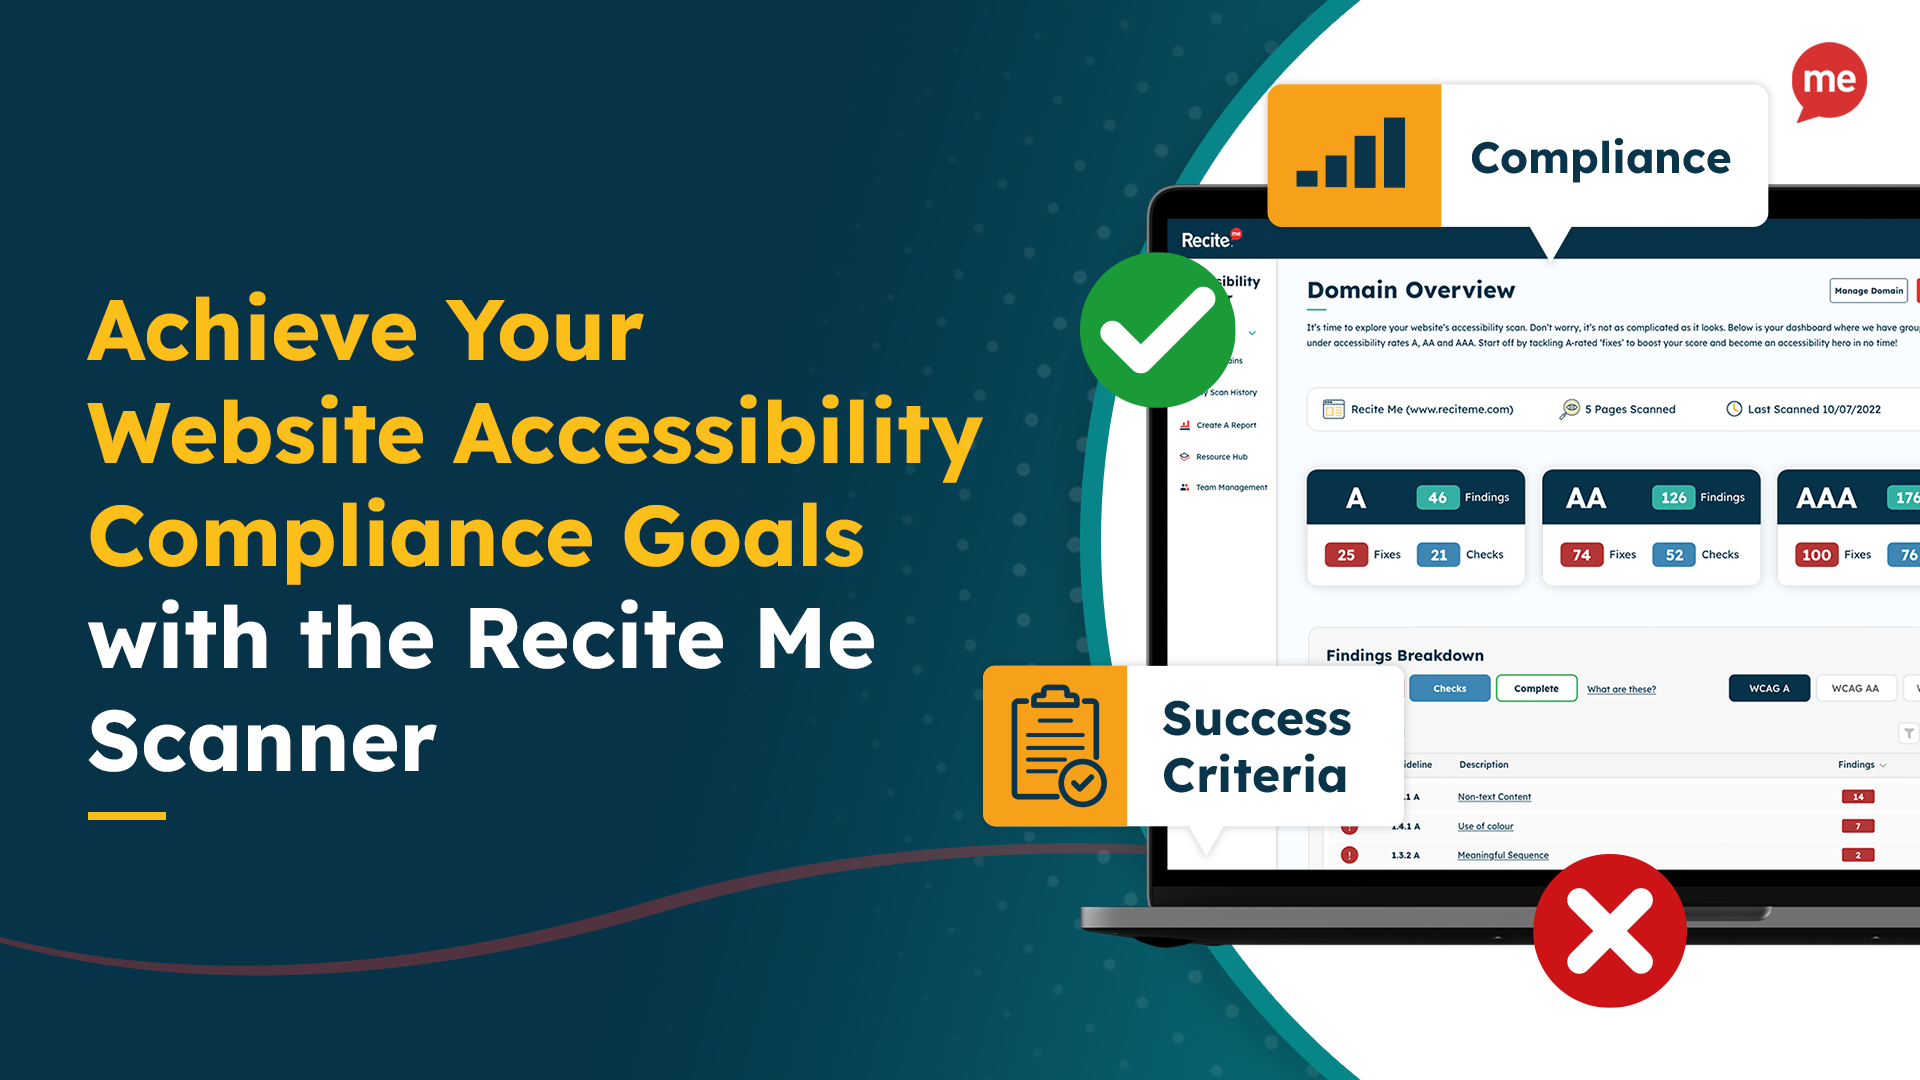 Achieve Your Website Accessibility Compliance Goals with the Recite Me Scanner